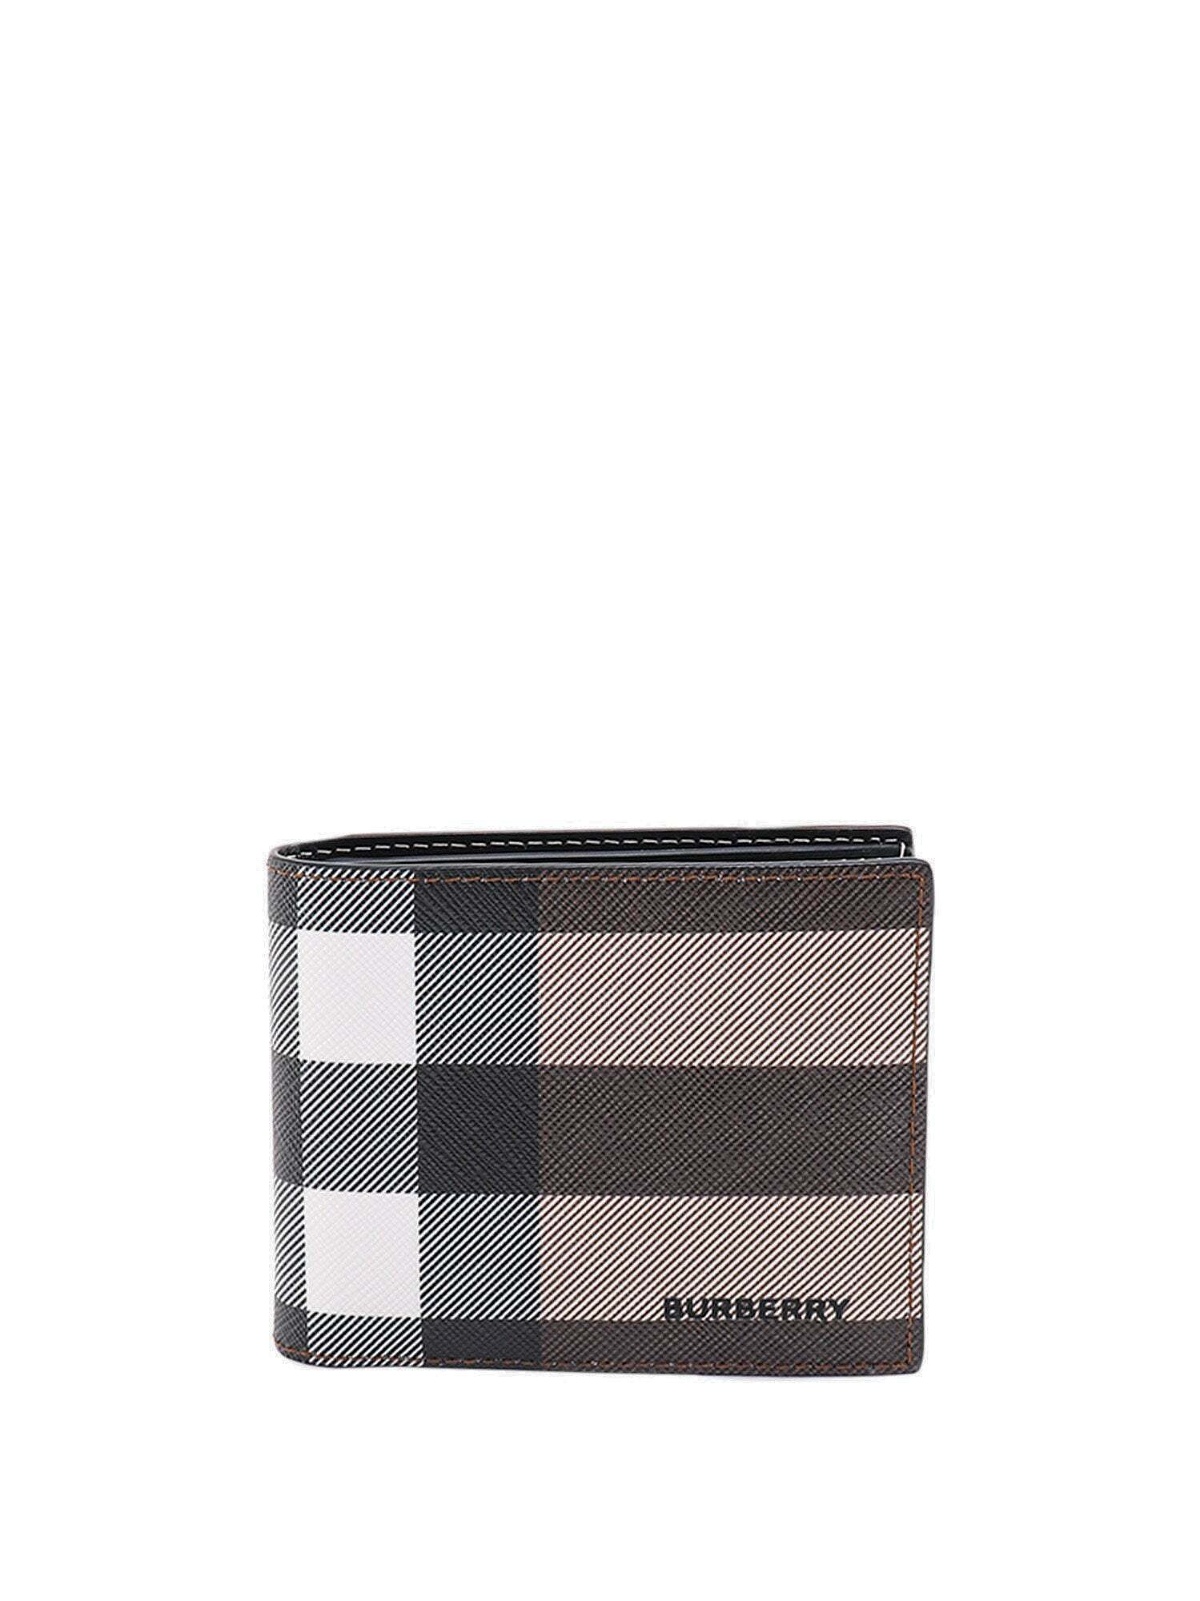 Burberry Wallet Brown Mens Burberry